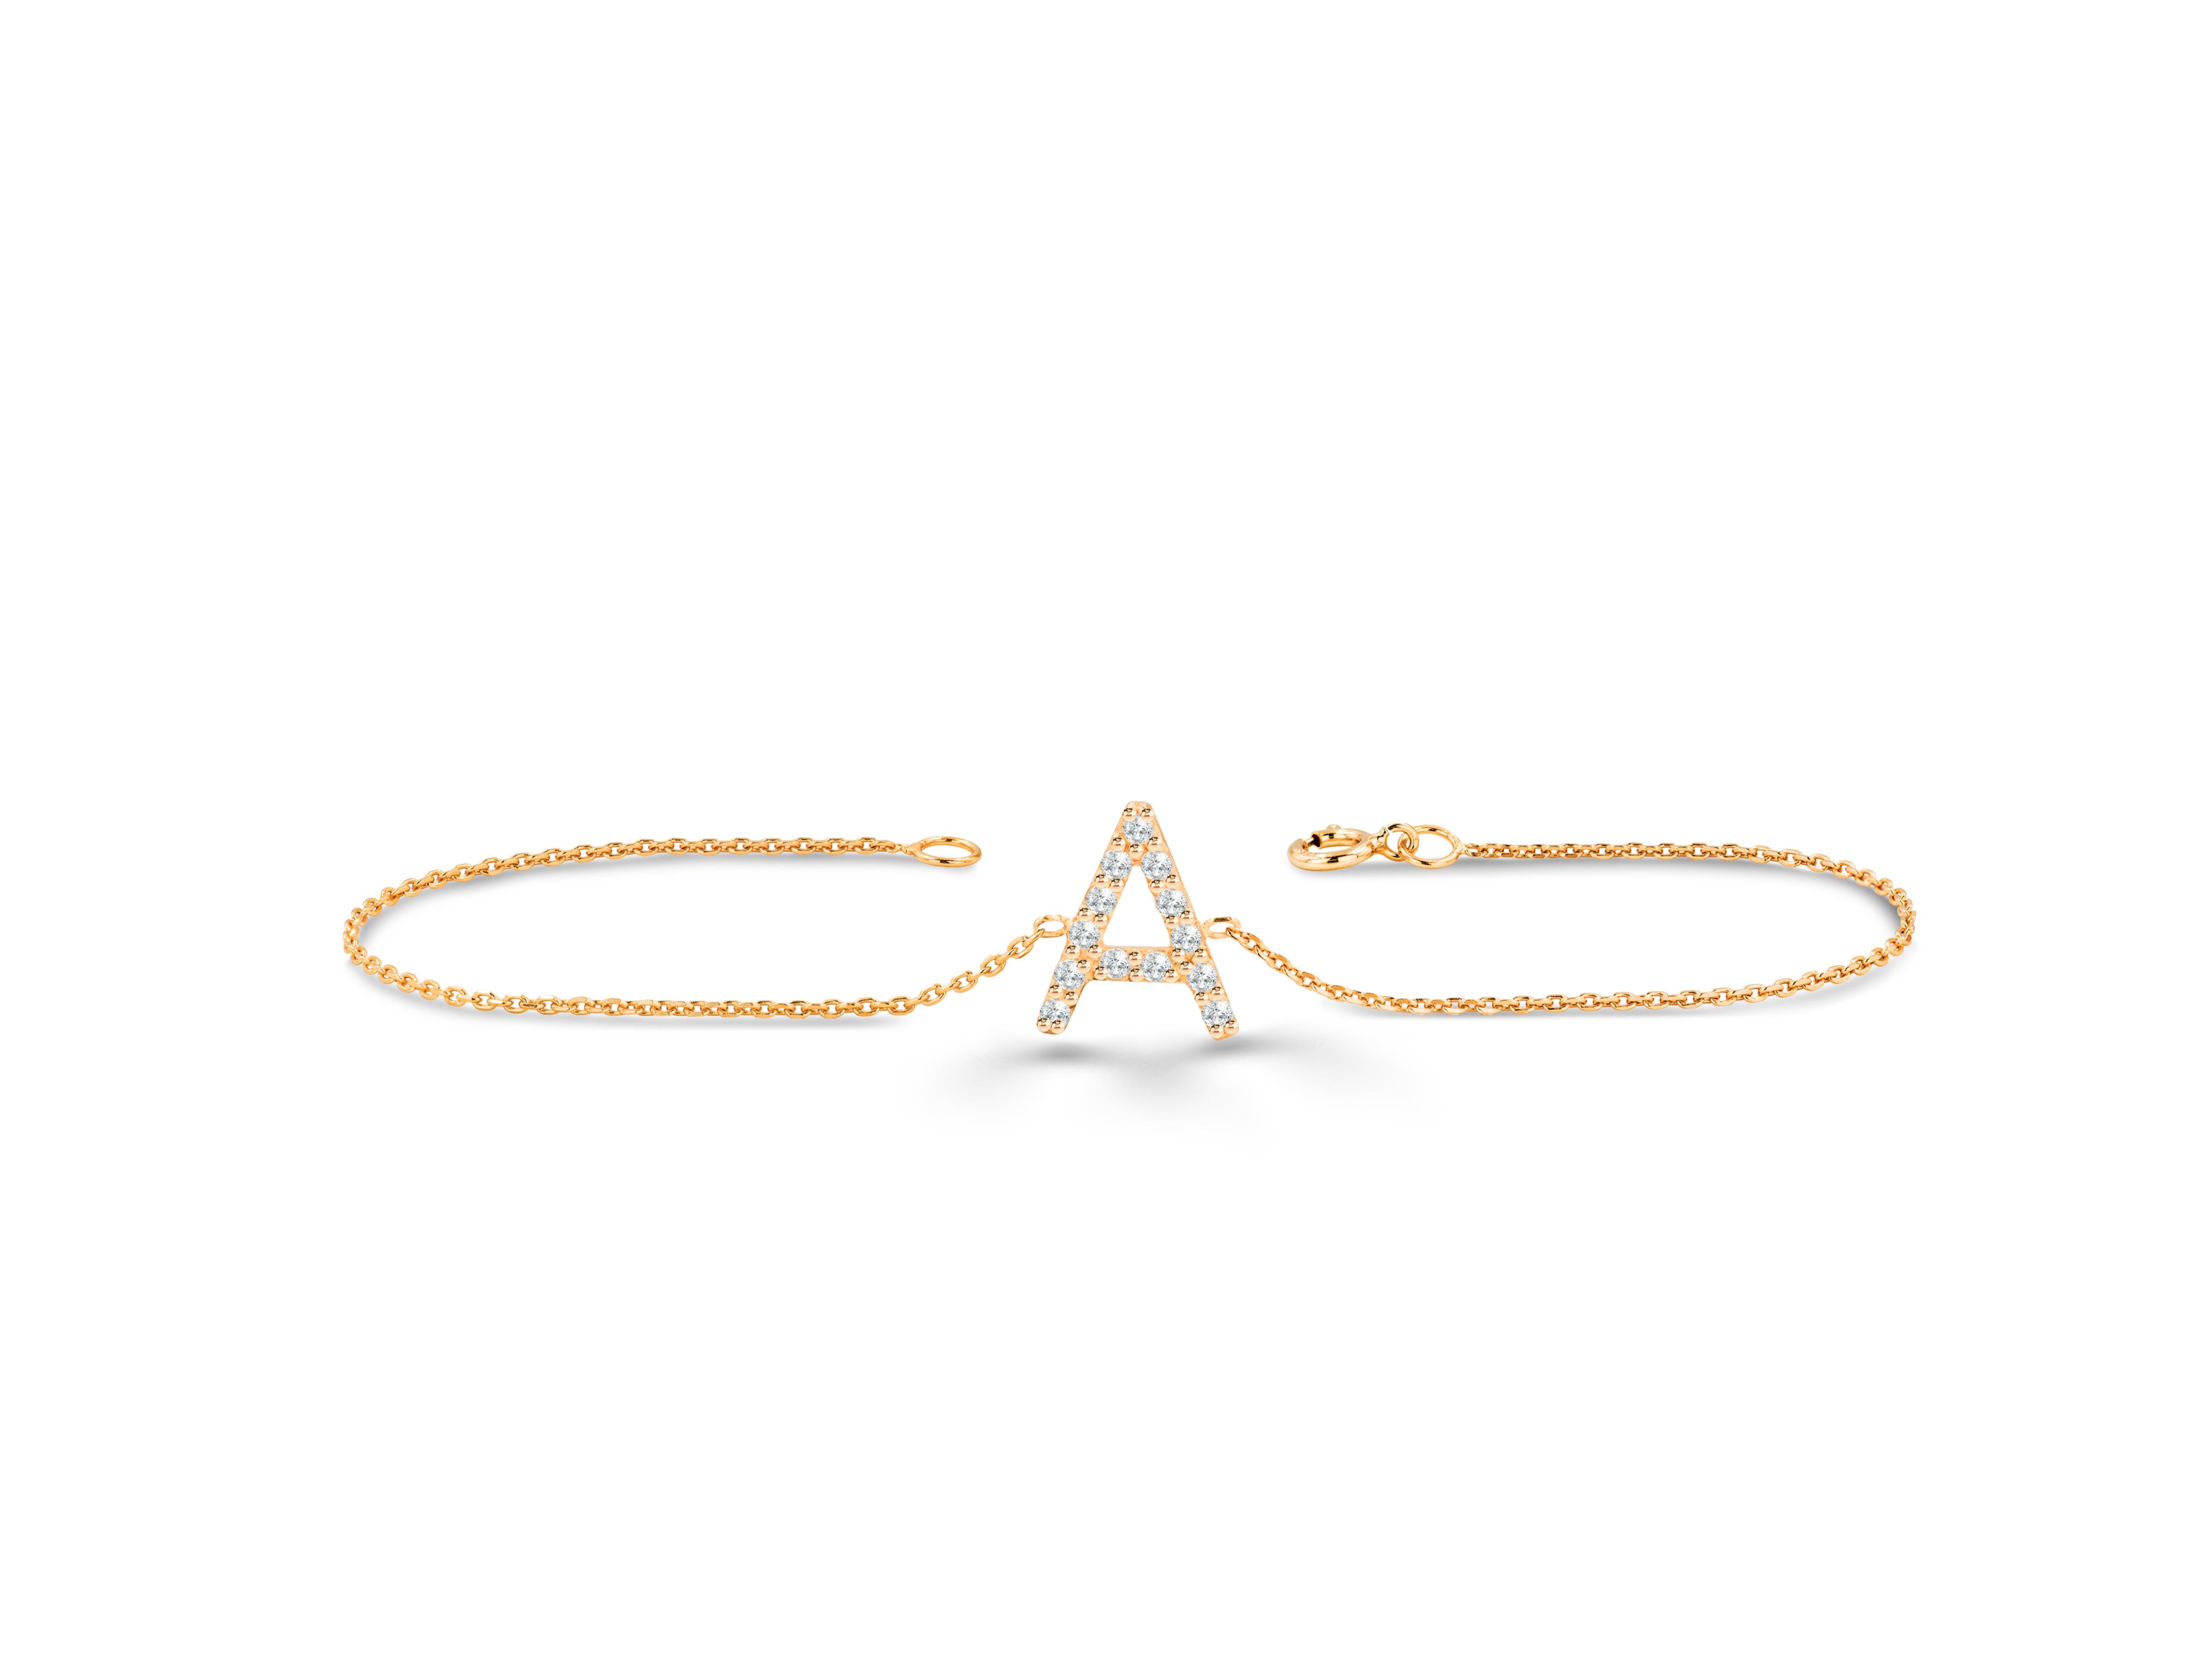 Beautiful and elegant, this Initial bracelet is made with pure gold and consists of genuine and natural diamonds. This bracelet can be personalized in any Initial or letter you desire. The Gold color can be customized as well. The diamonds are hand